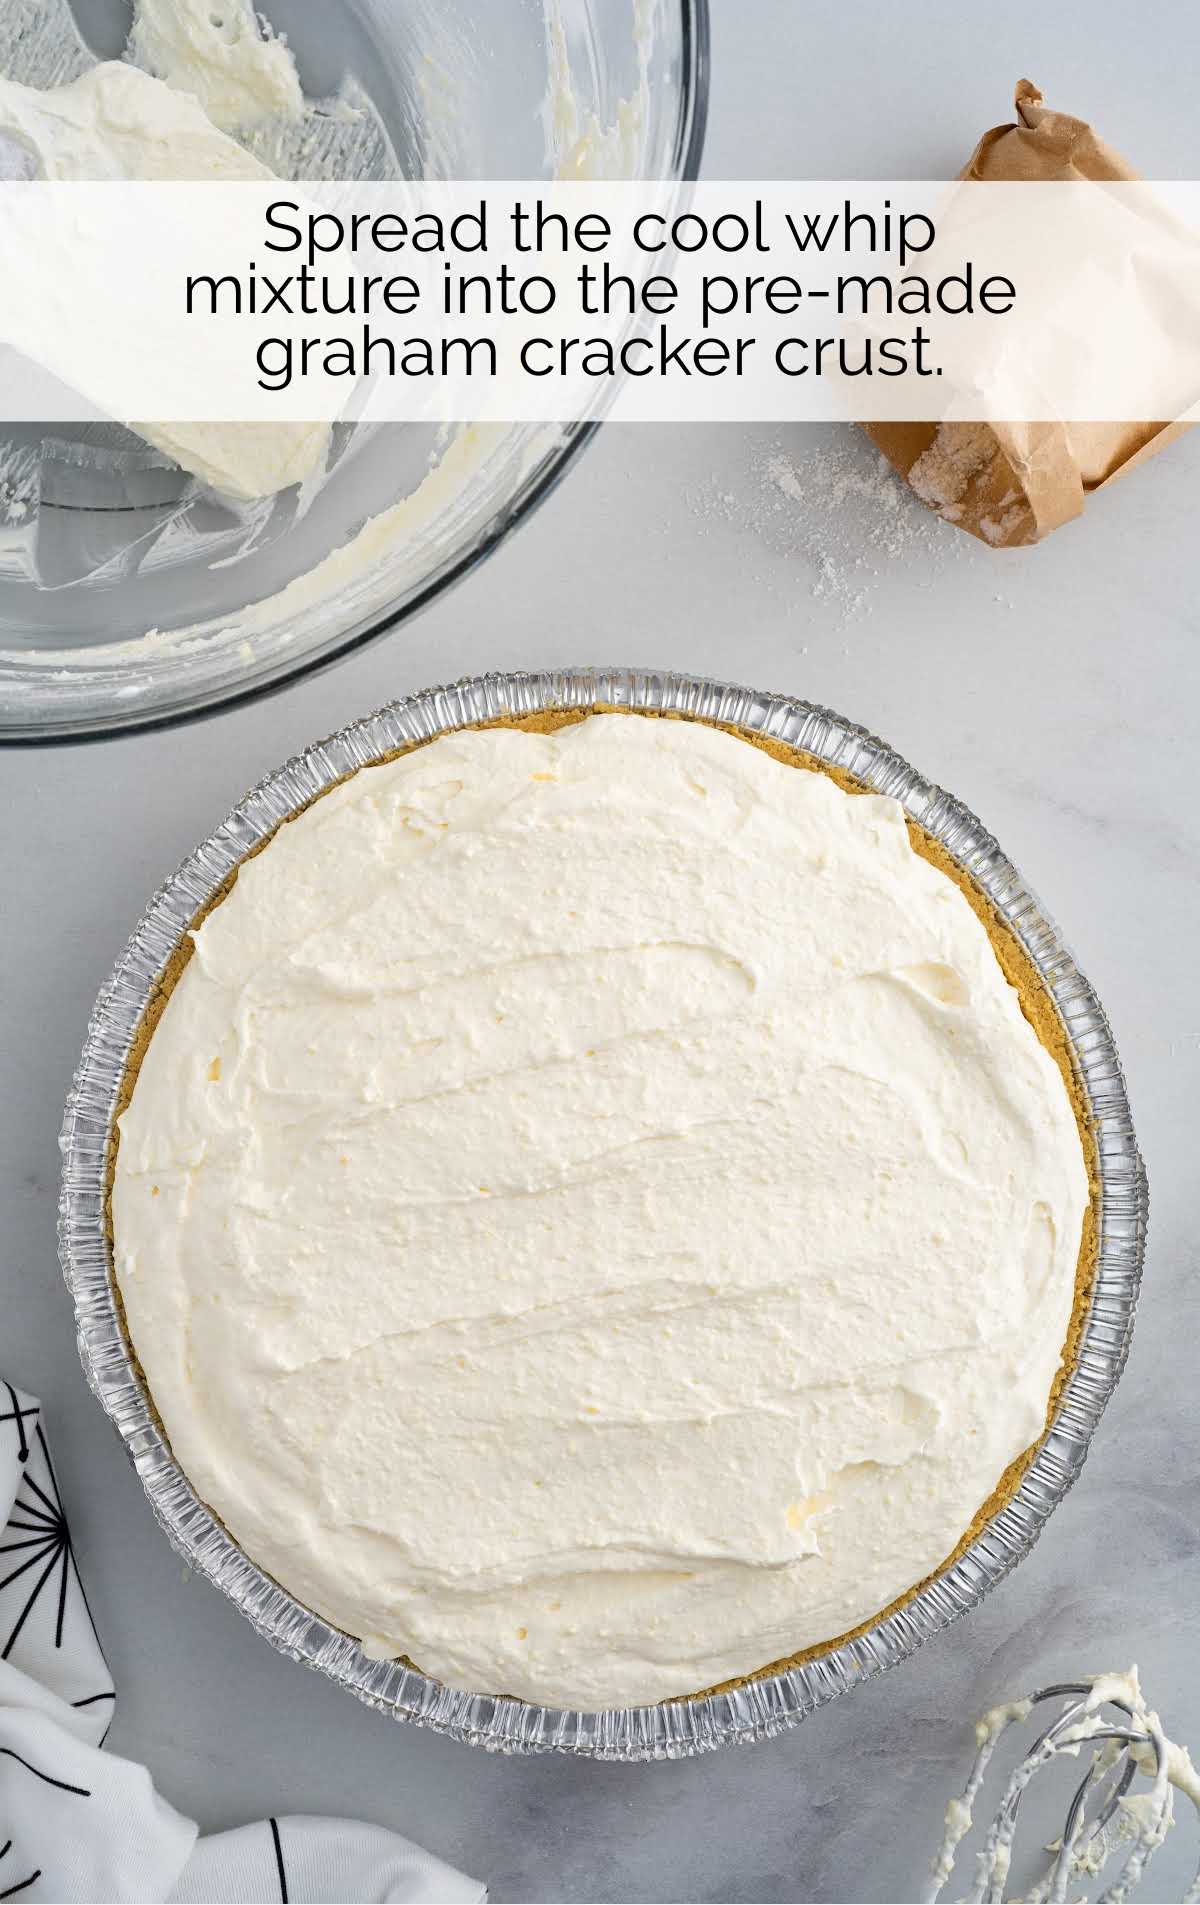 cool whip mixture spread into the pie crust